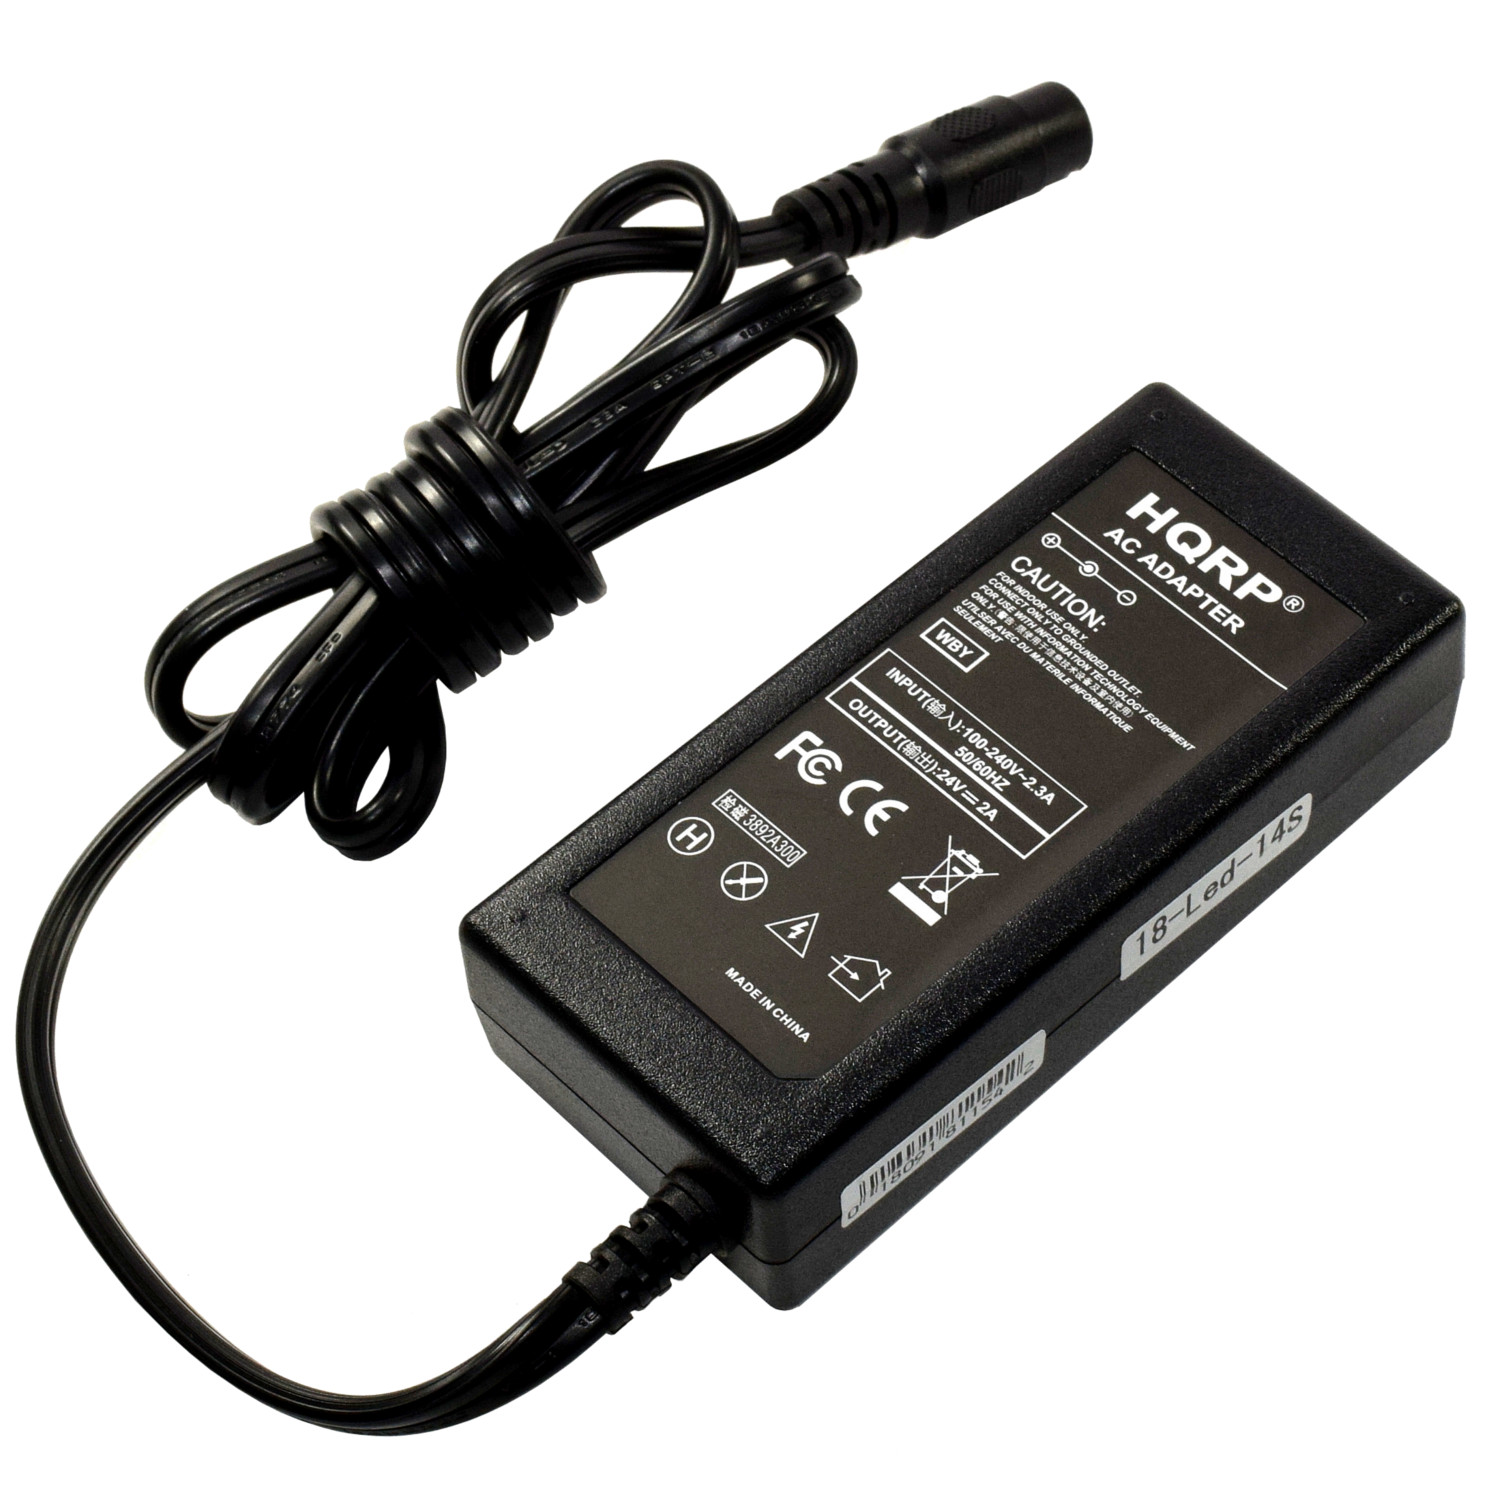 HQRP Fast Battery Charger for Razor E325, Razor Trikke E2, Razor Ground Force Go Kart, Razor iMod, Urban Express, X-12, X-24 Electric Scooter, AC Adapter Power Supply Cord + Euro Plug Adapter - image 3 of 8